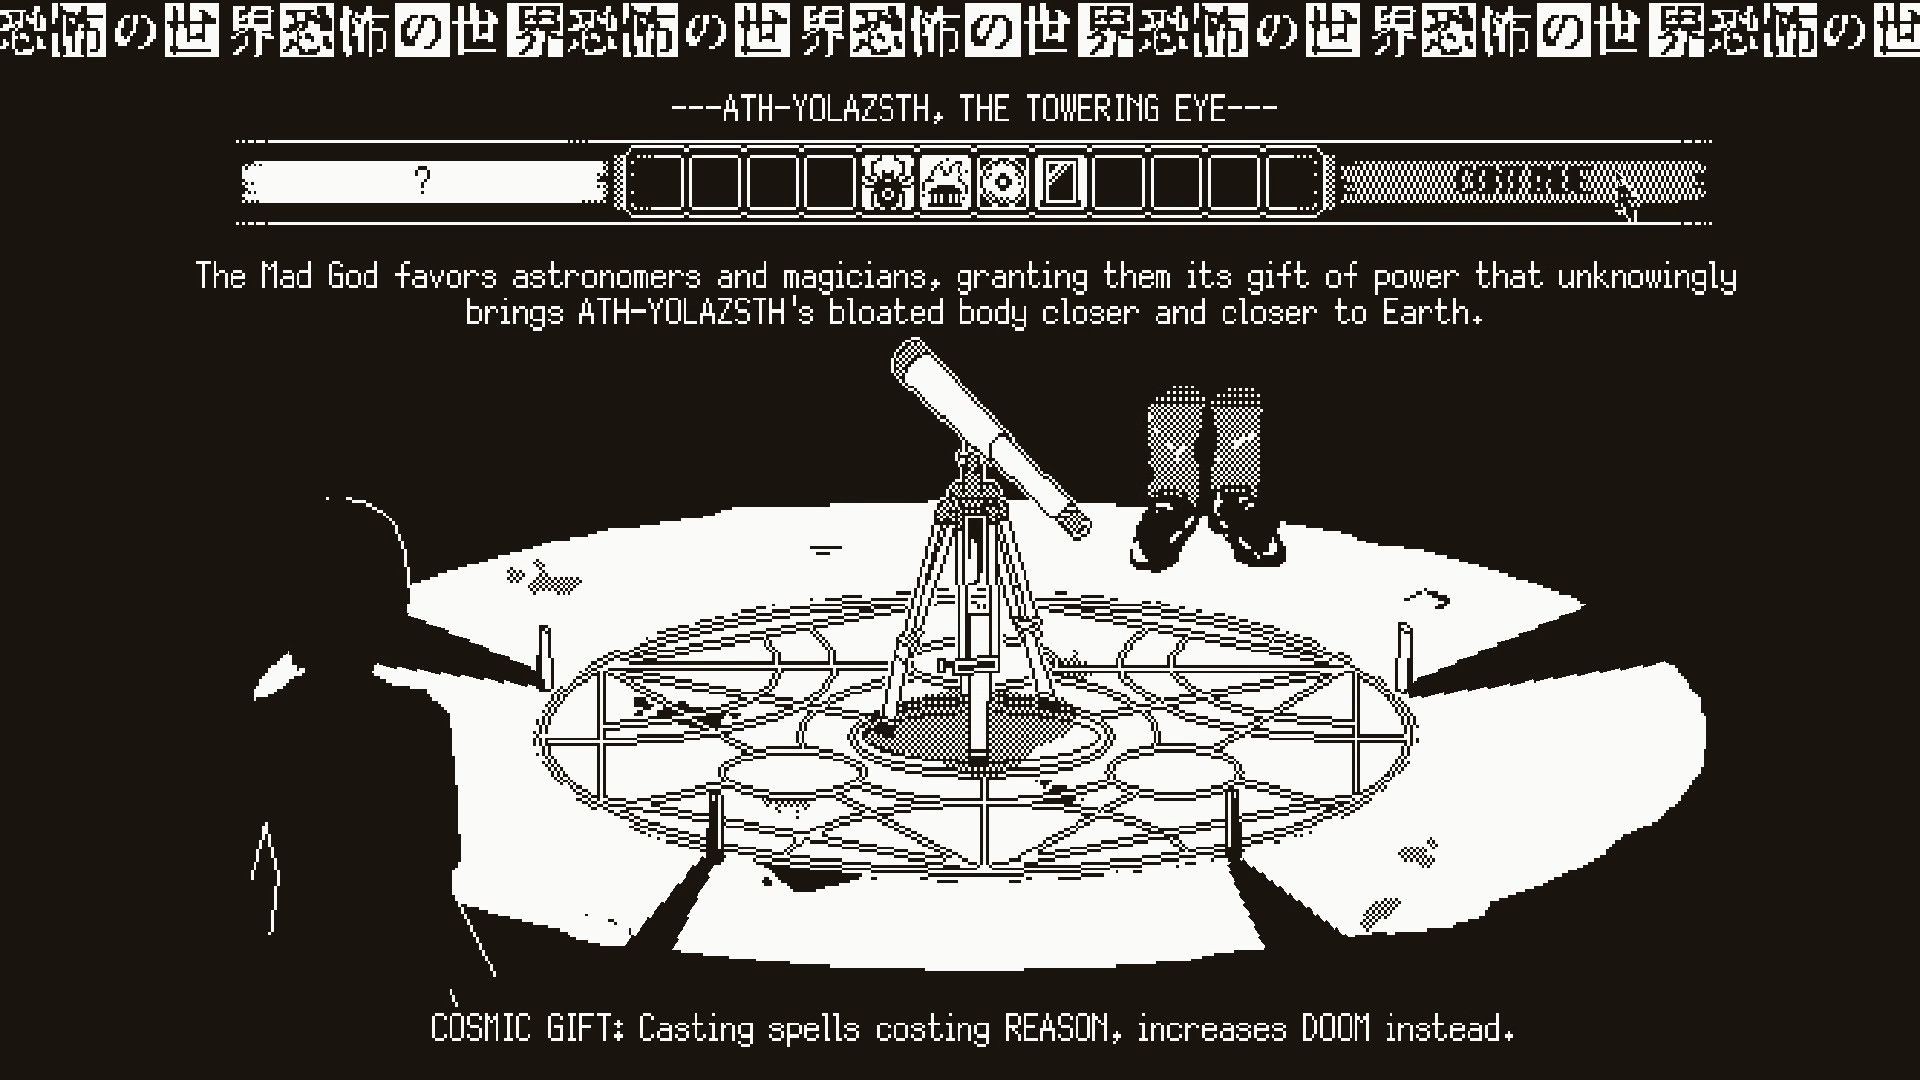 World of Horror A 1-bit scene depicting a telescope at the centre of a room with two figures obscured by shadow.